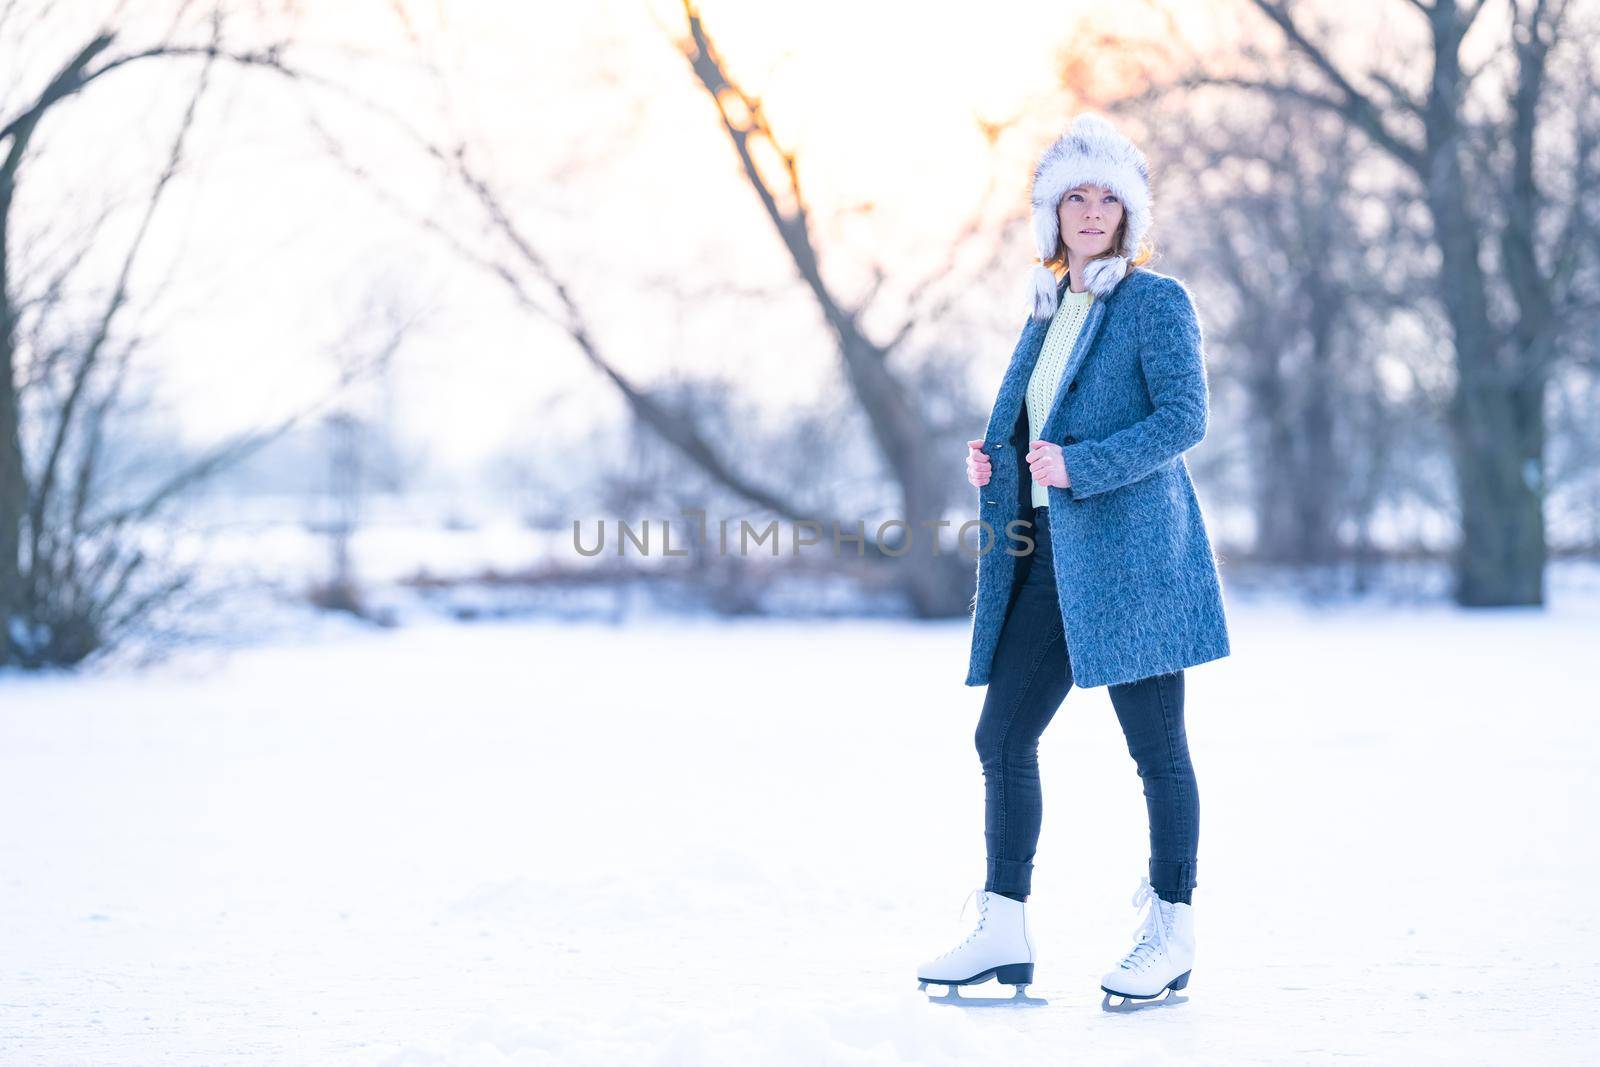 ice skating on a frozen pond in winter. banner by Edophoto